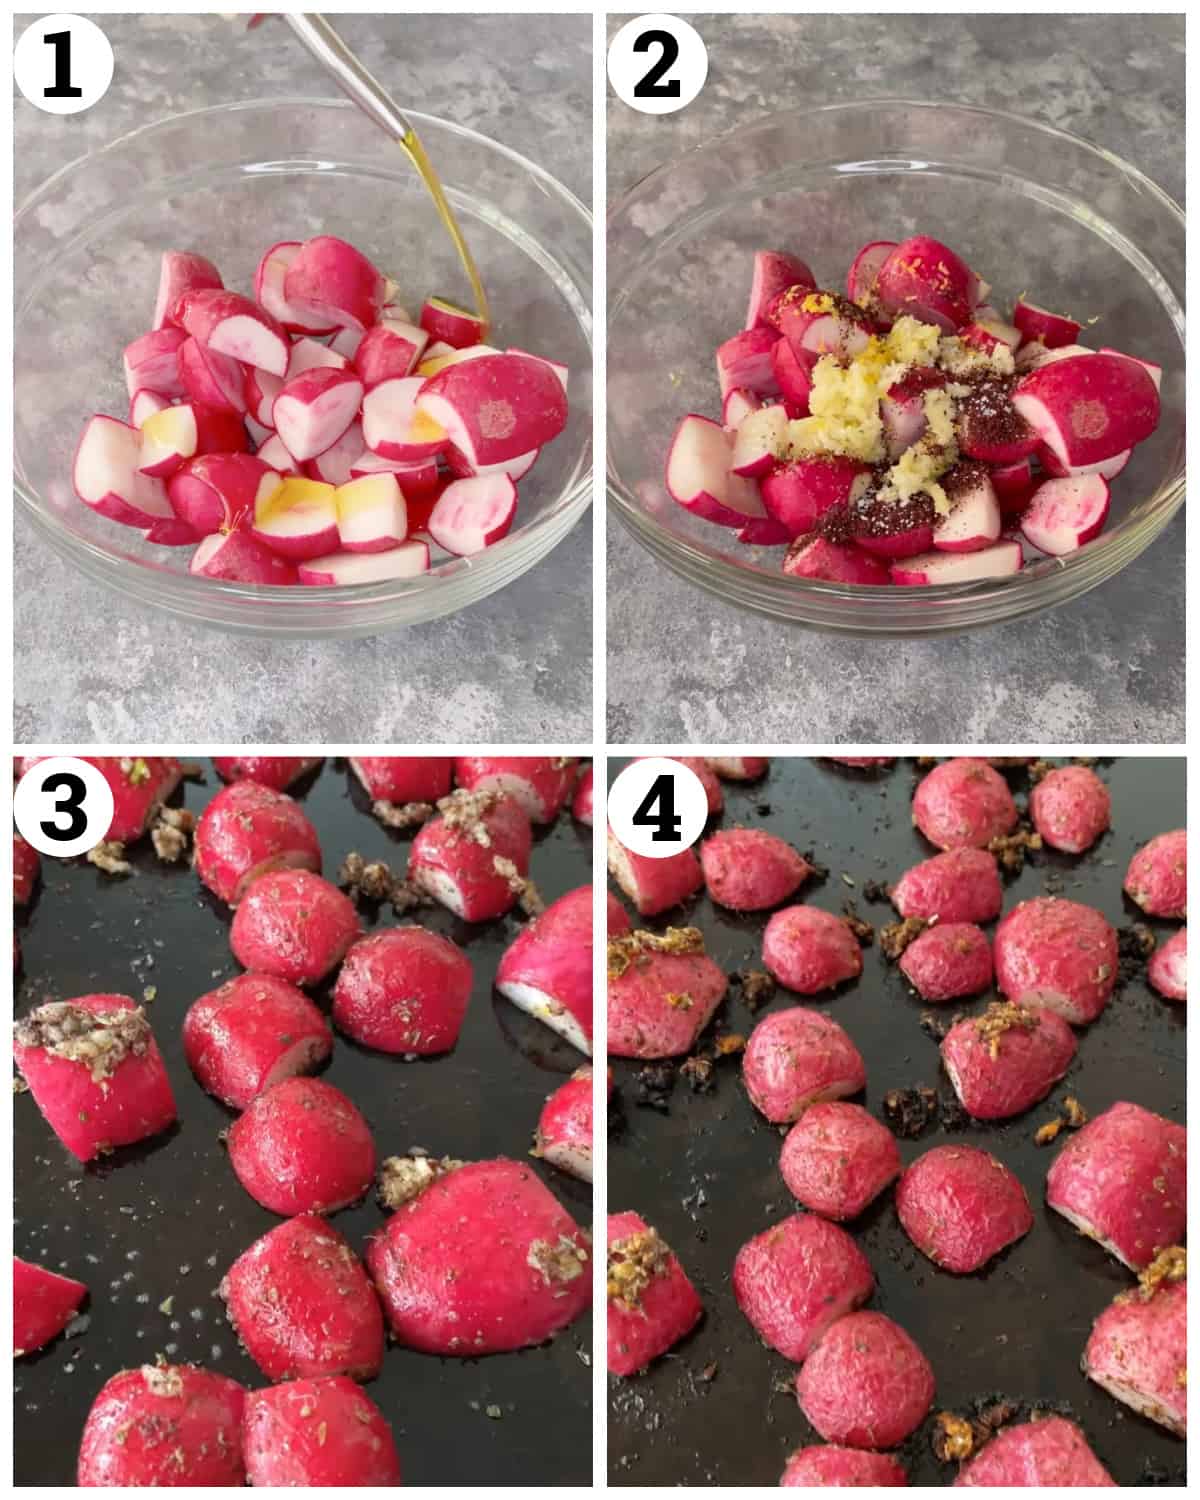 mix the radishes with olive oil and seasoning then roast for 25 minutes.